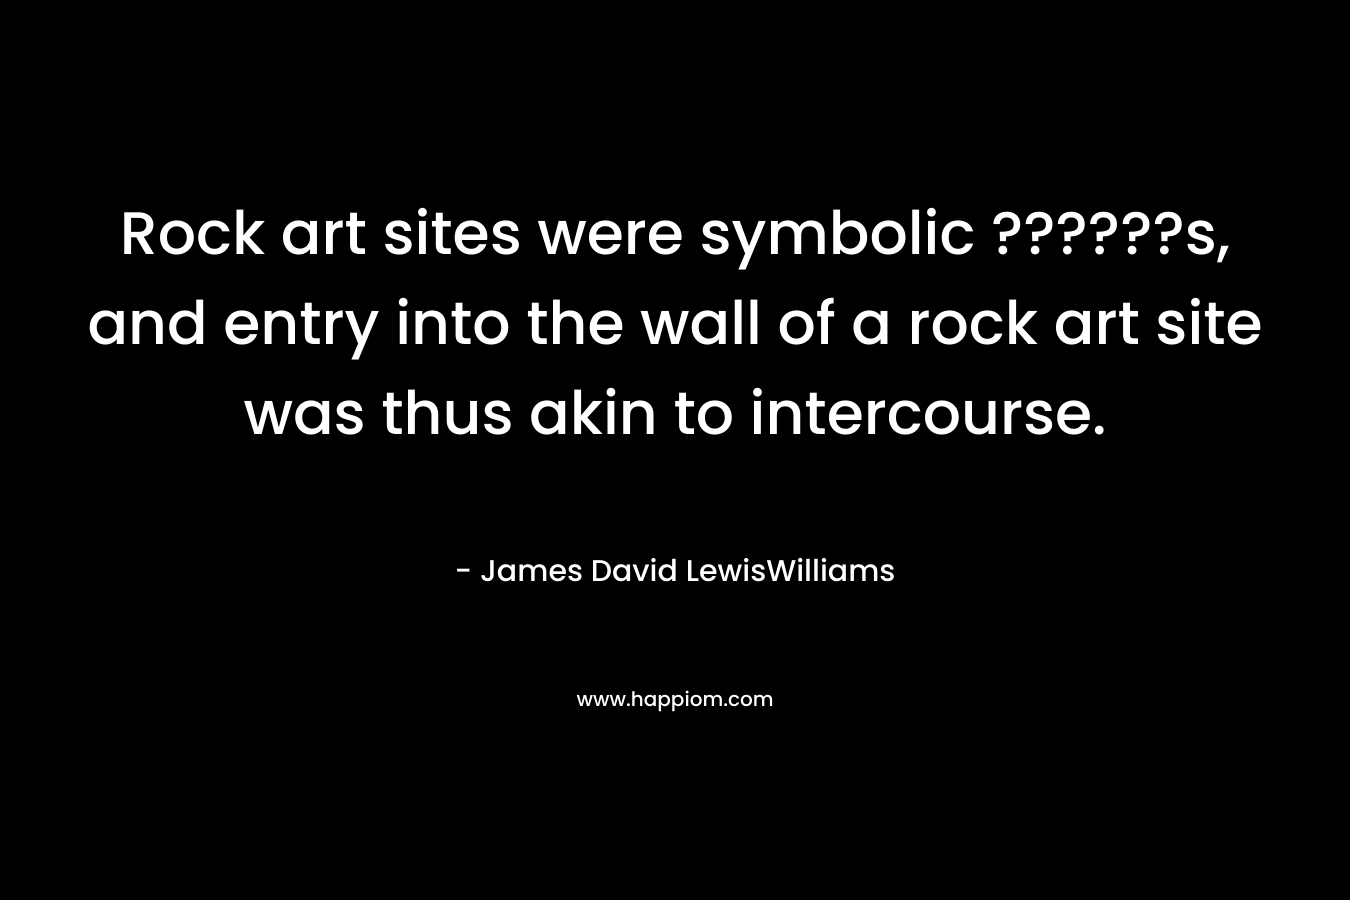 Rock art sites were symbolic ??????s, and entry into the wall of a rock art site was thus akin to intercourse. – James David LewisWilliams